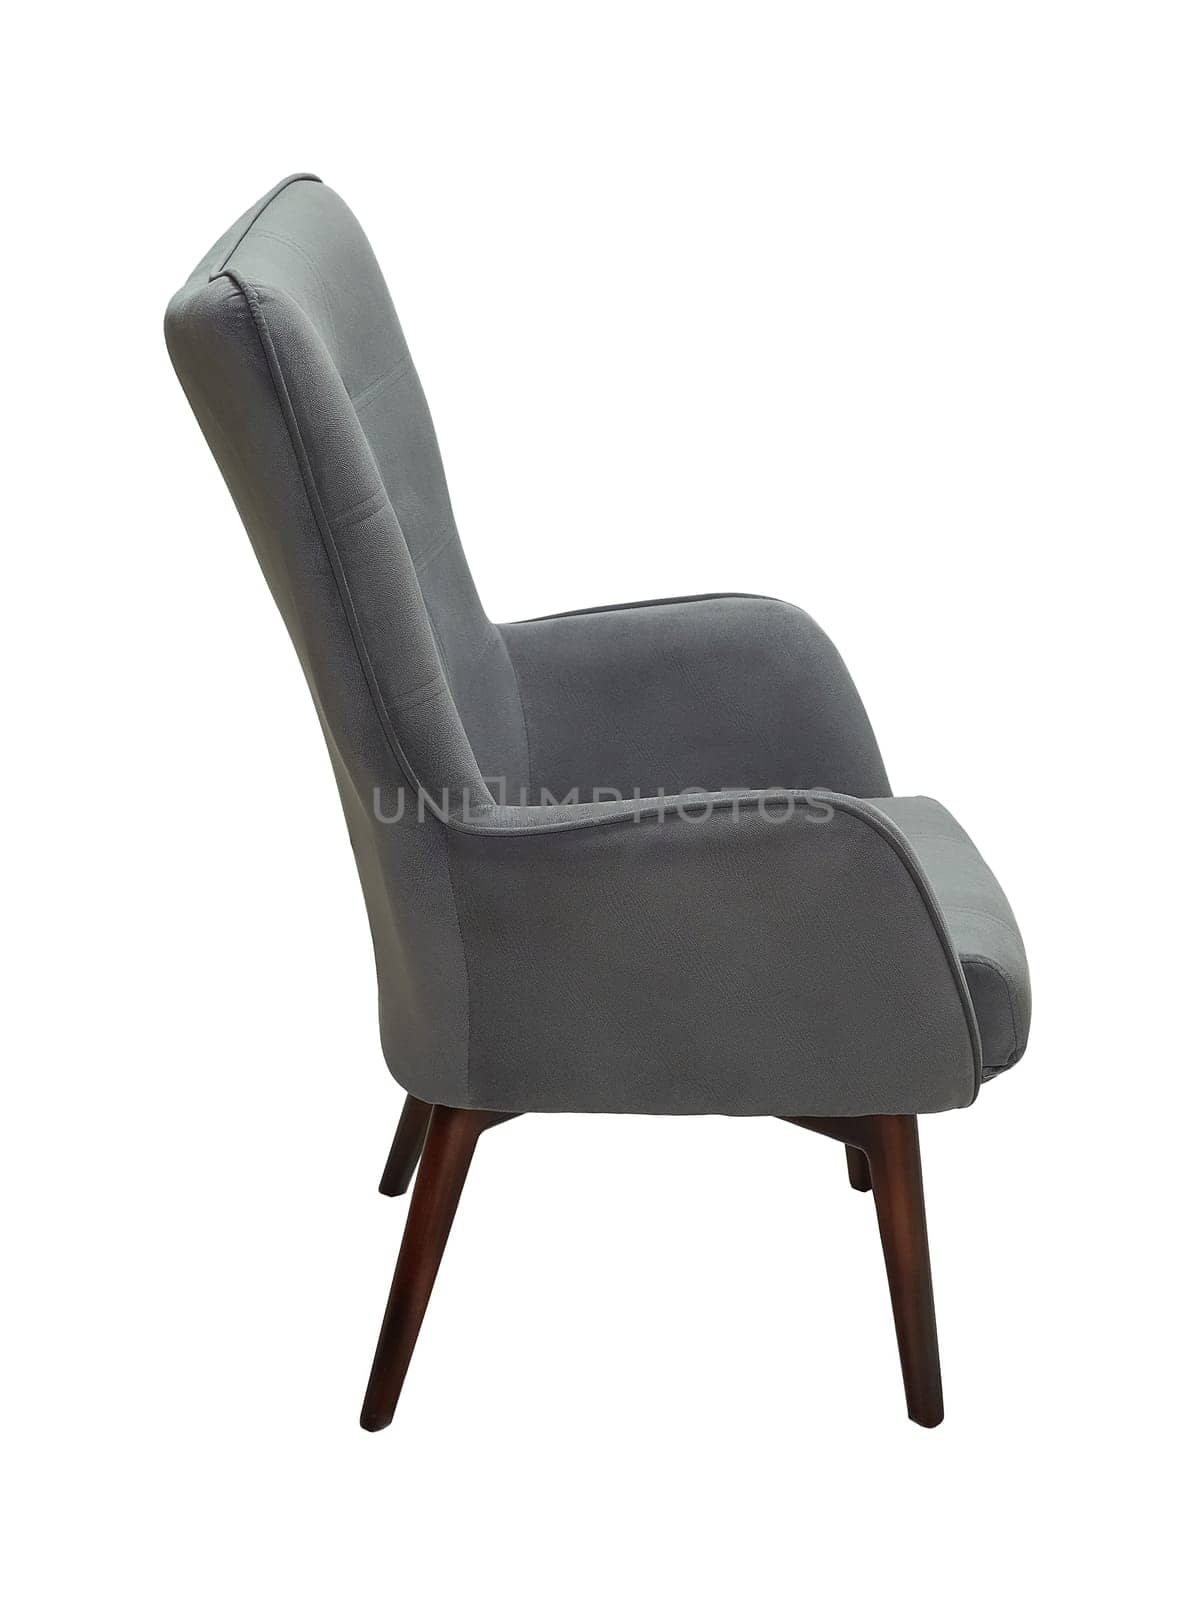 modern grey fabric armchair with wooden legs isolated on white background, side view.